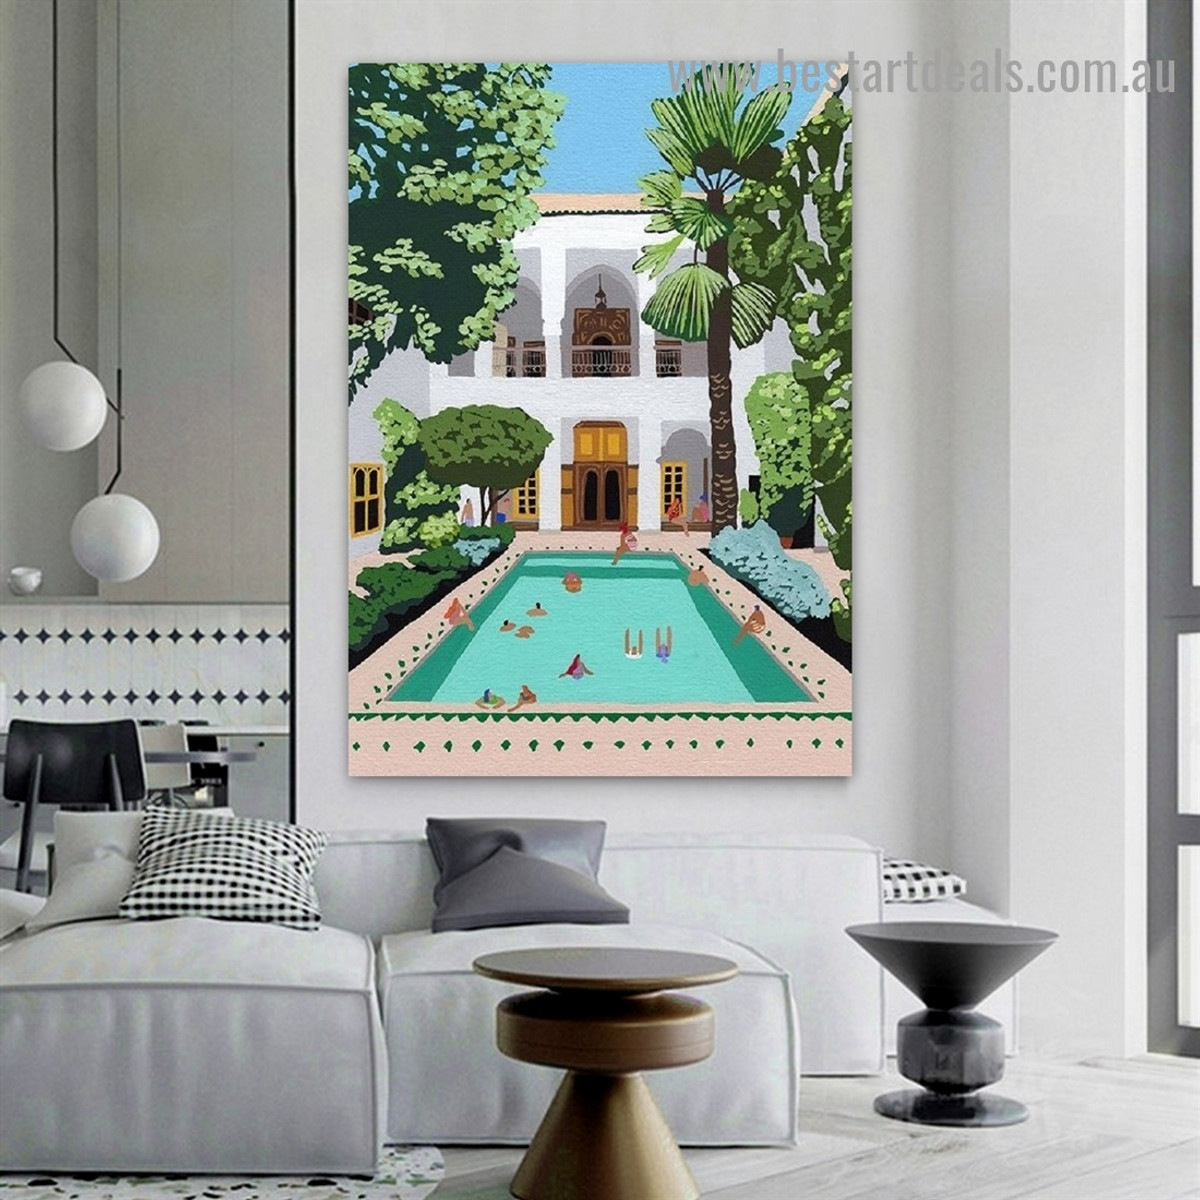 Bathing Peoples Architecture Illustration Modern Framed Portrait Picture Canvas Print for Room Wall Adornment